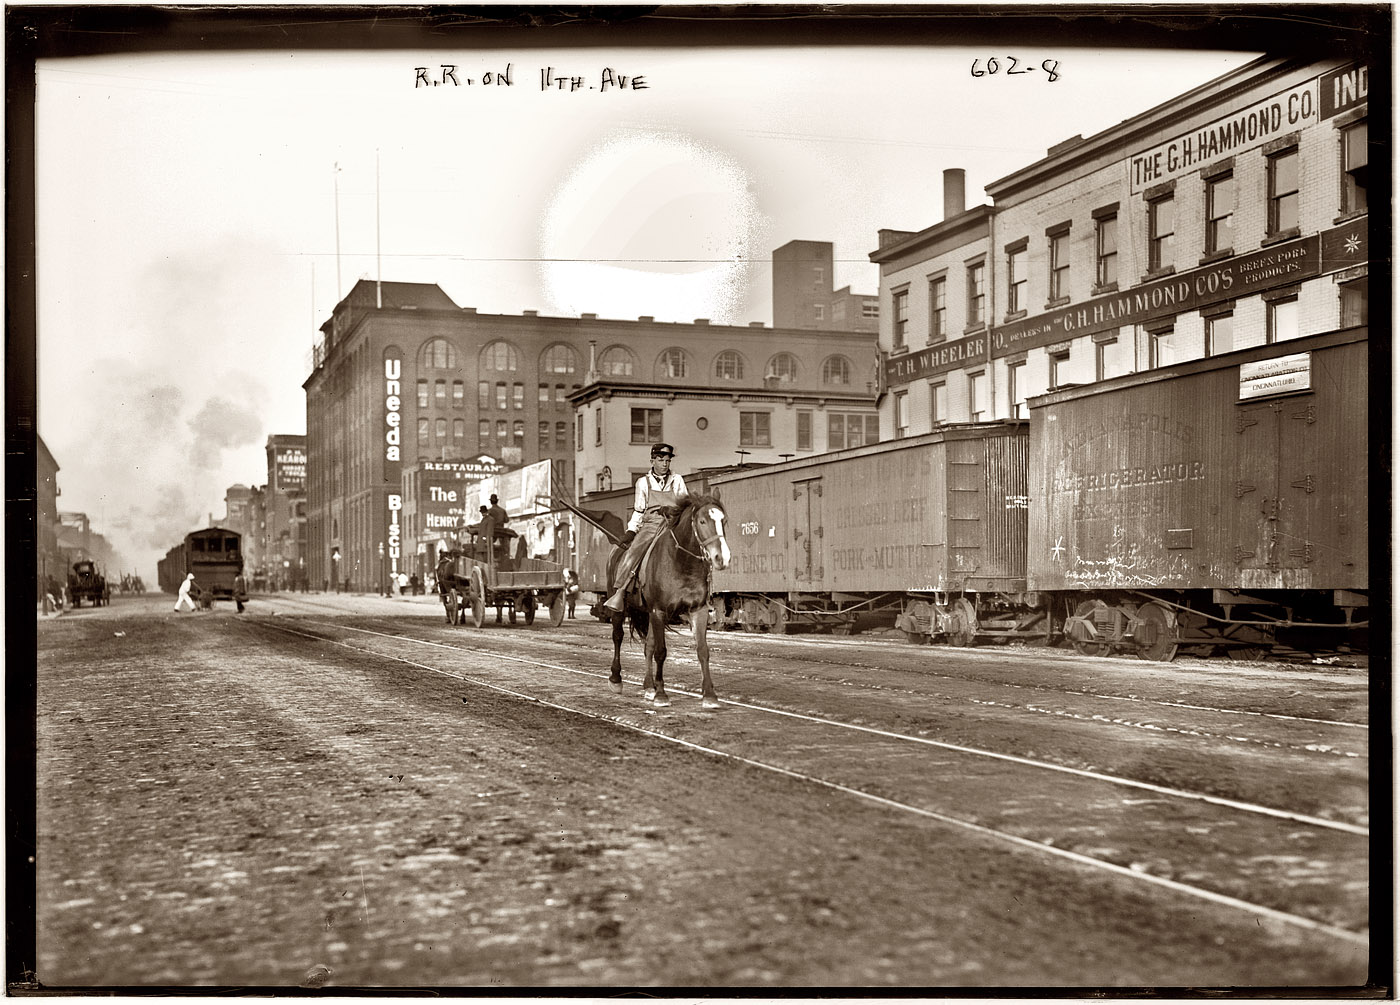 Mounted flagman and freight. Another circa 1911 view of the Eleventh Avenue rail line in New York near West 26th Street. View full size. George Grantham Bain Collection. The light spot at the top is from deterioration of the emulsion.